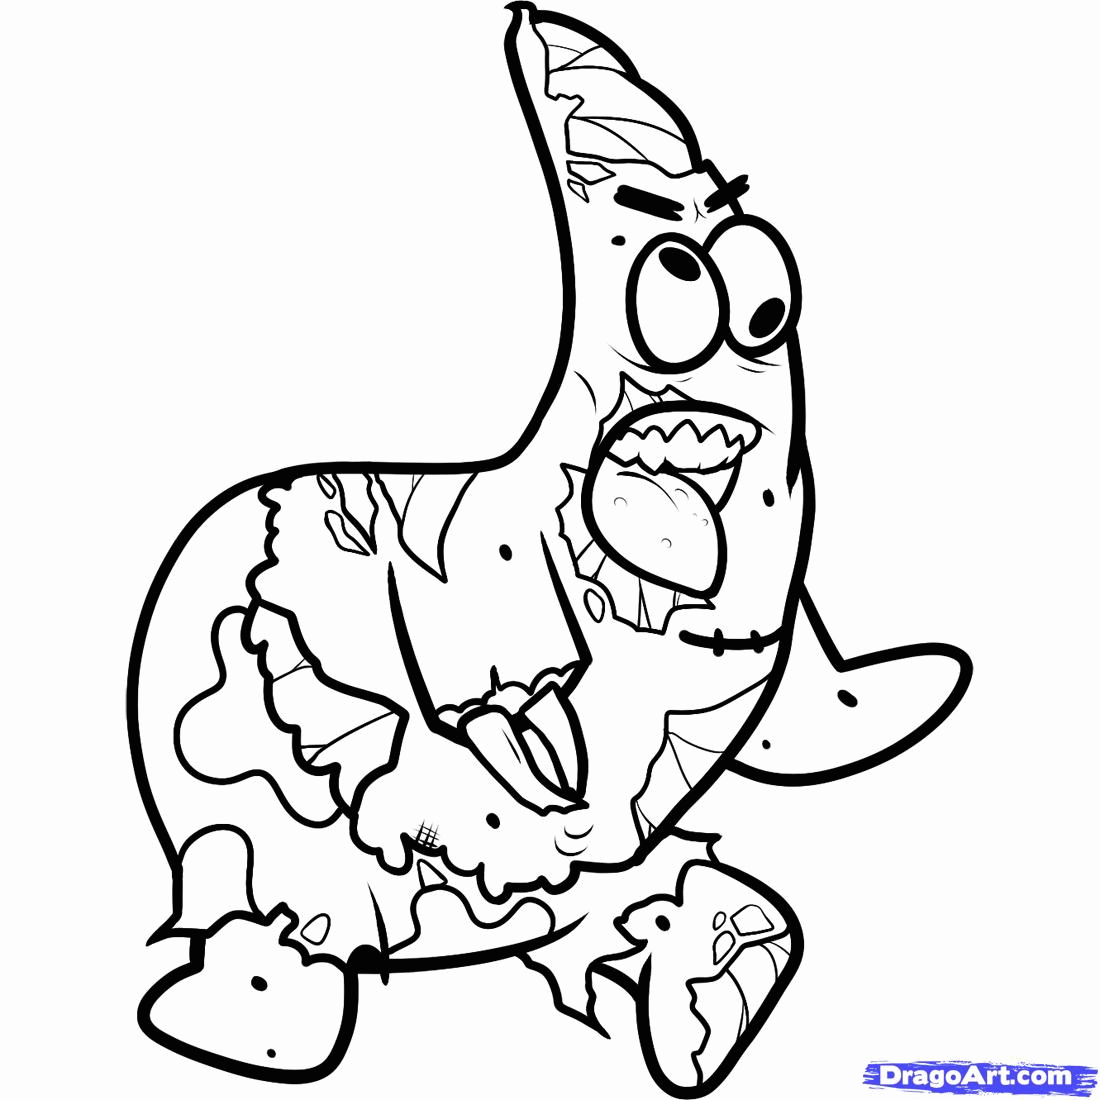 free-cartoon-zombie-coloring-pages-download-free-cartoon-zombie-coloring-pages-png-images-free